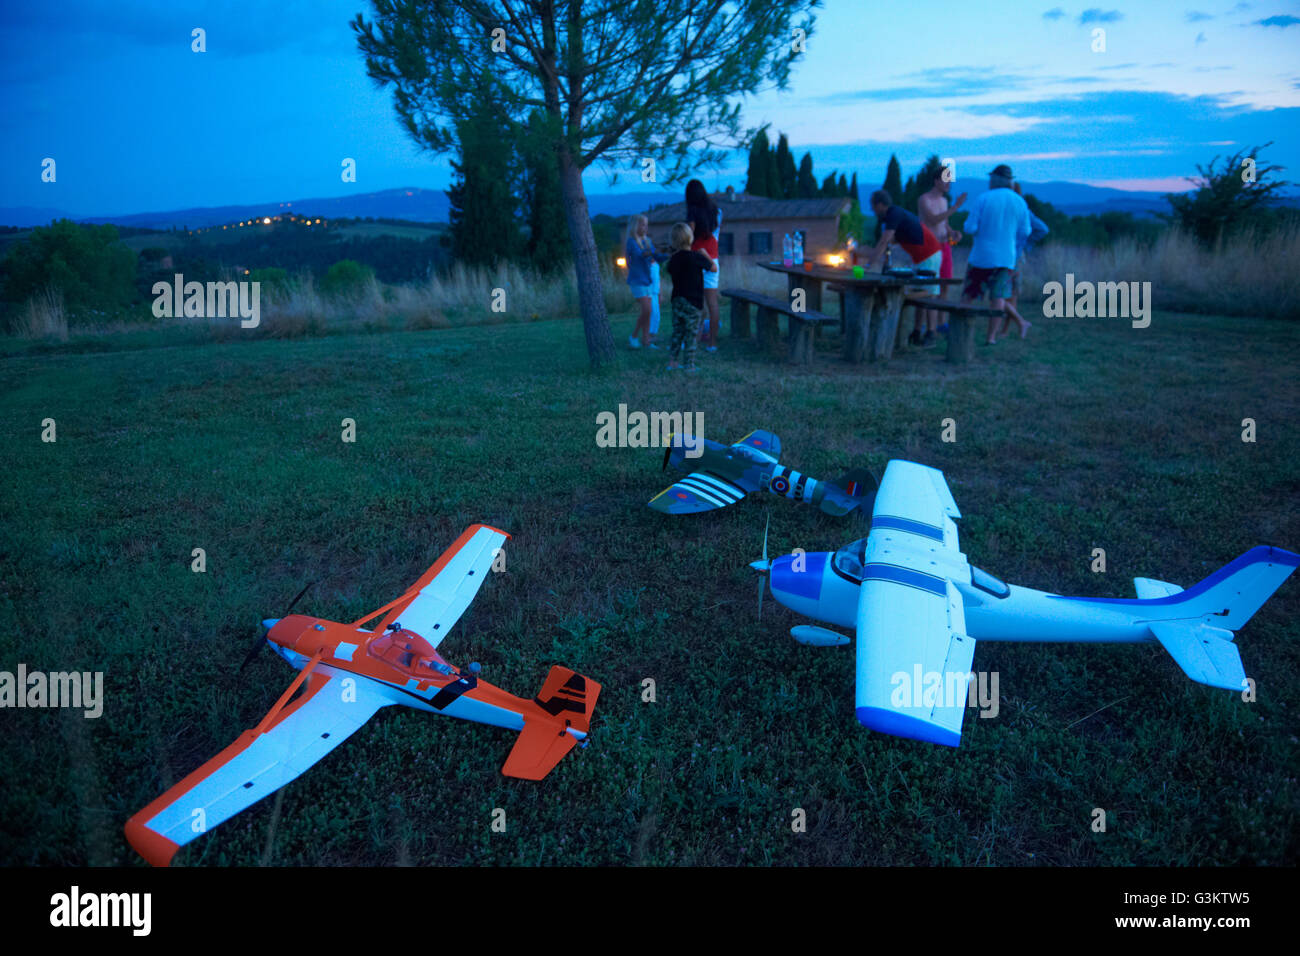 Family in field at dusk, remote control planes in foreground Stock Photo